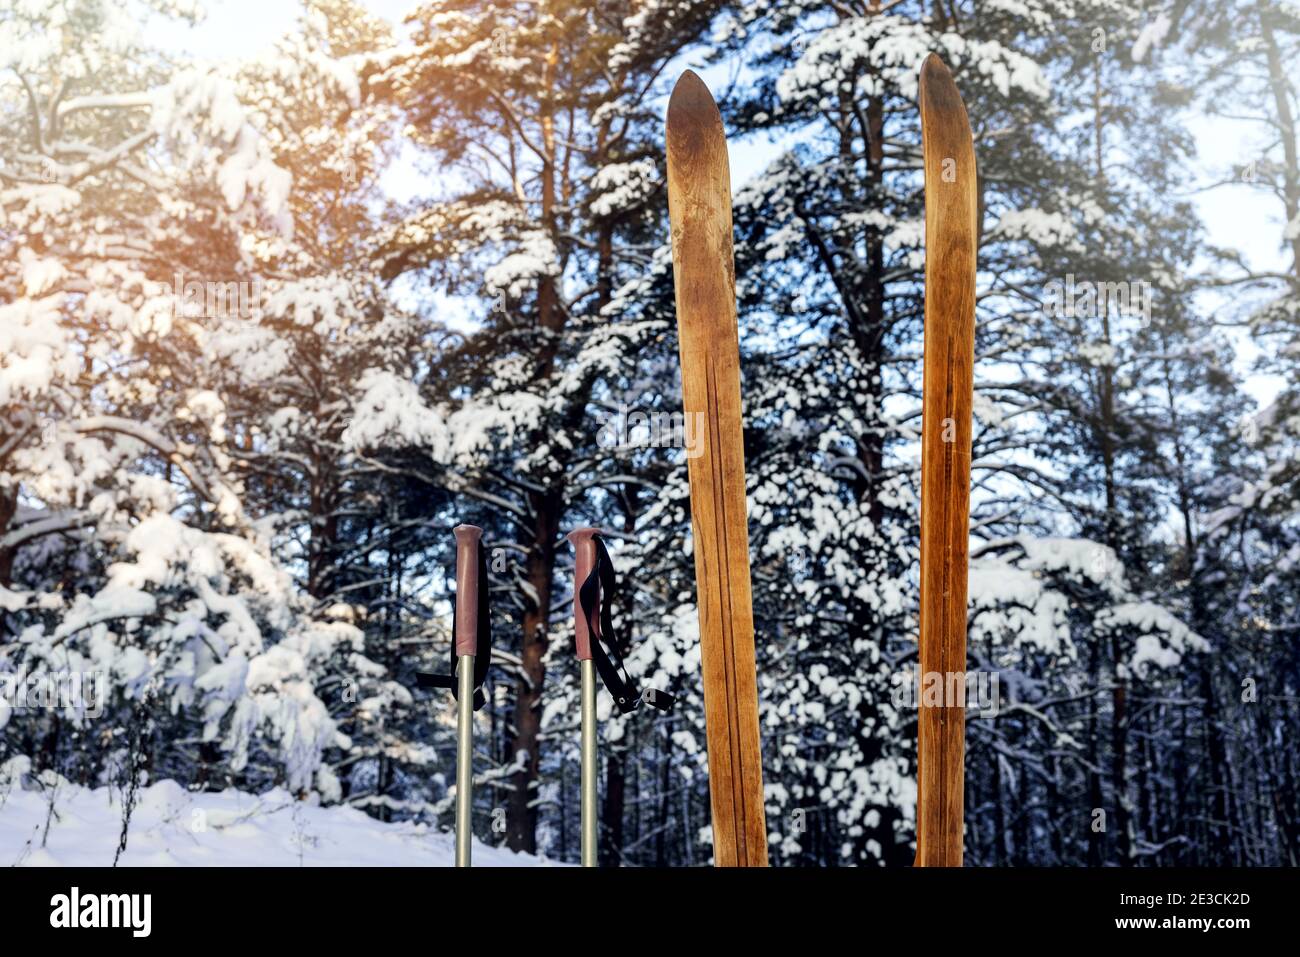 old wood backcountry skis with ski poles standing in the snow in snowy forest on sunny winter day. ski touring Stock Photo